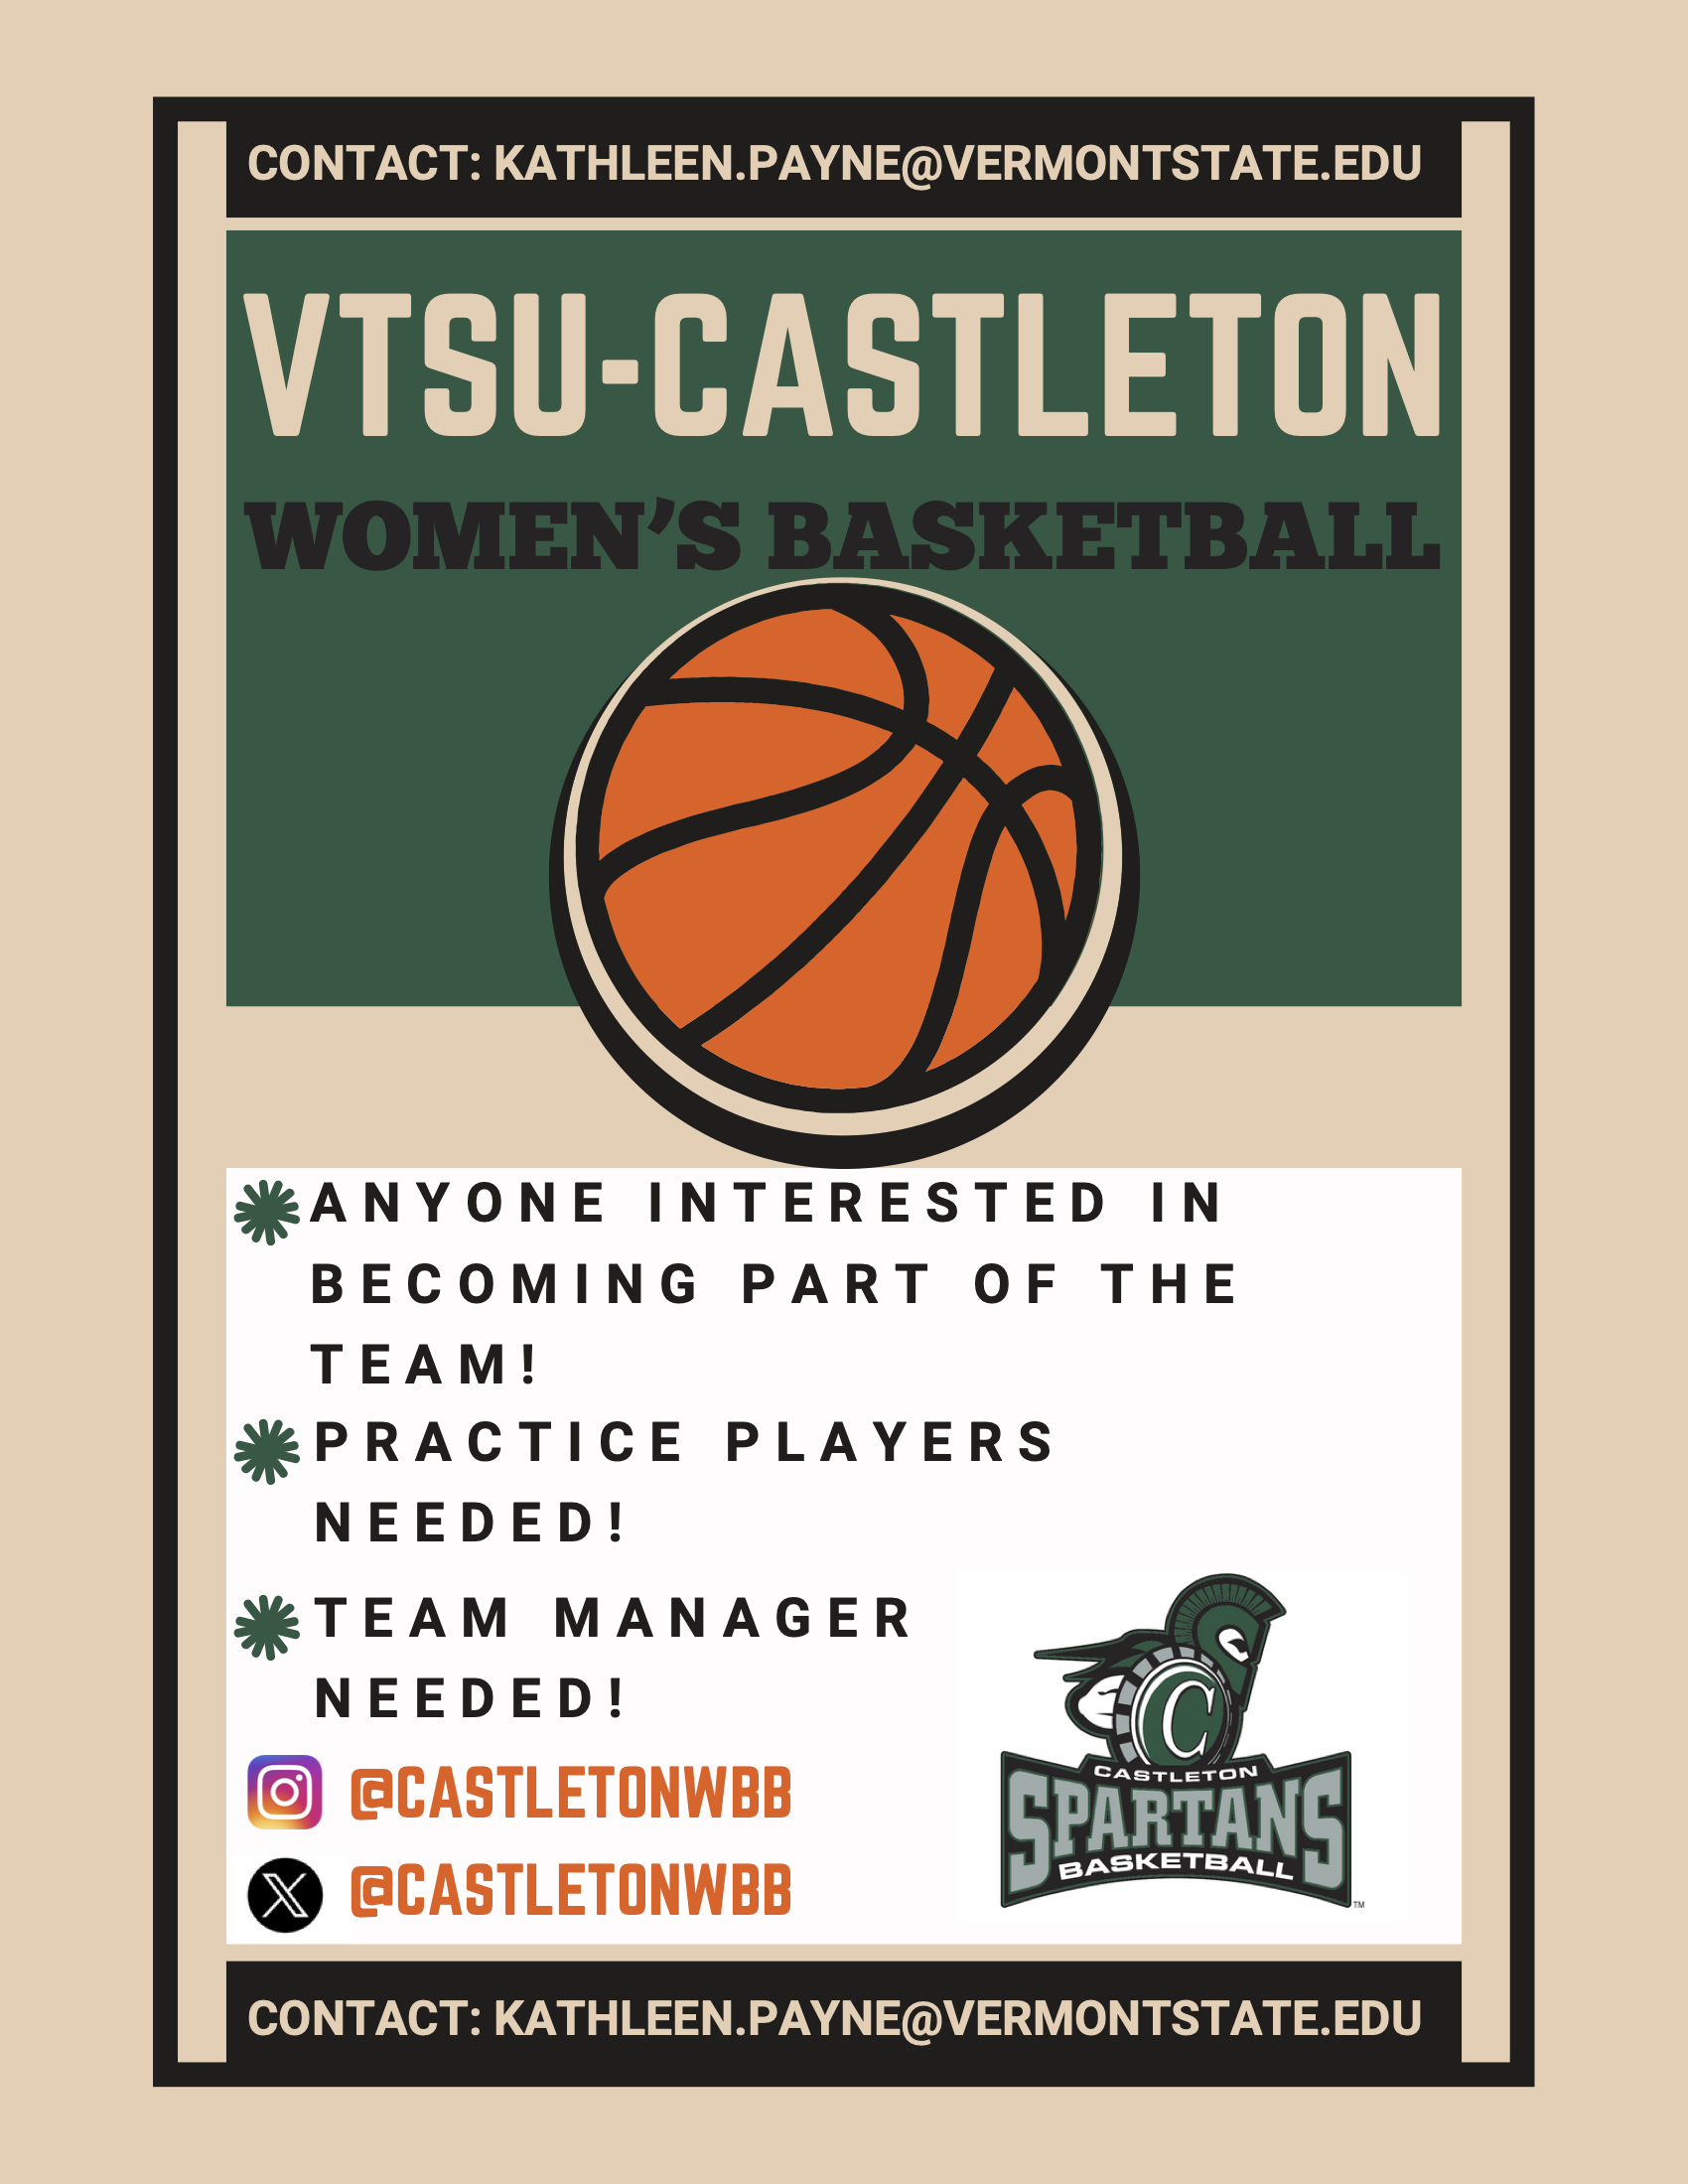 Are you interested in Women’s Basketball?